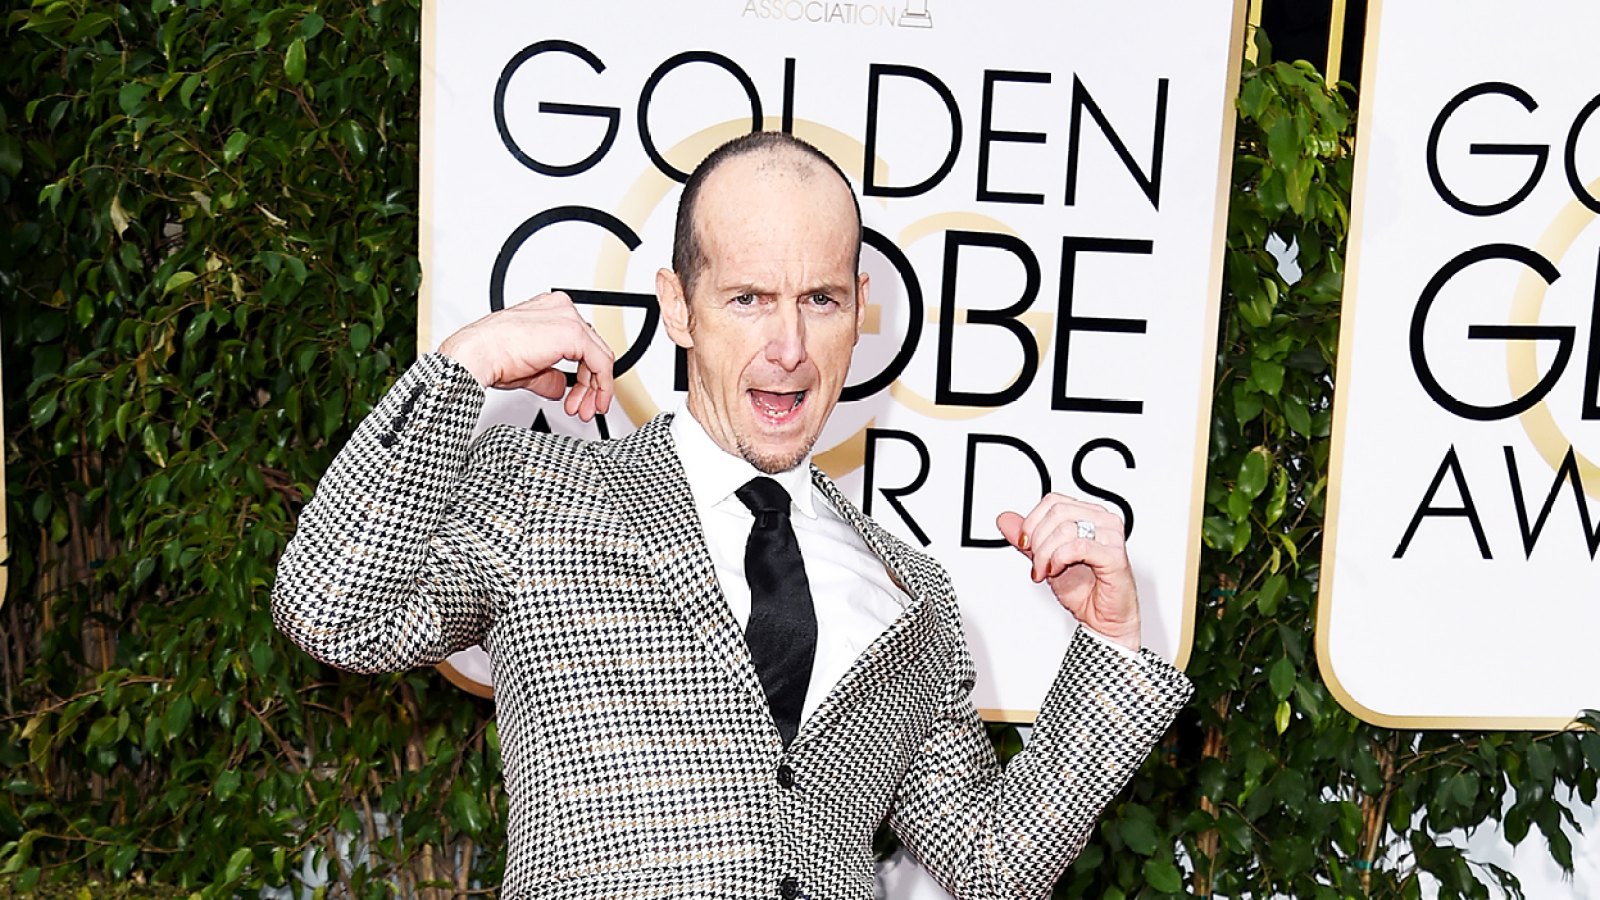 Denis O'Hare at the Golden Globes 2016